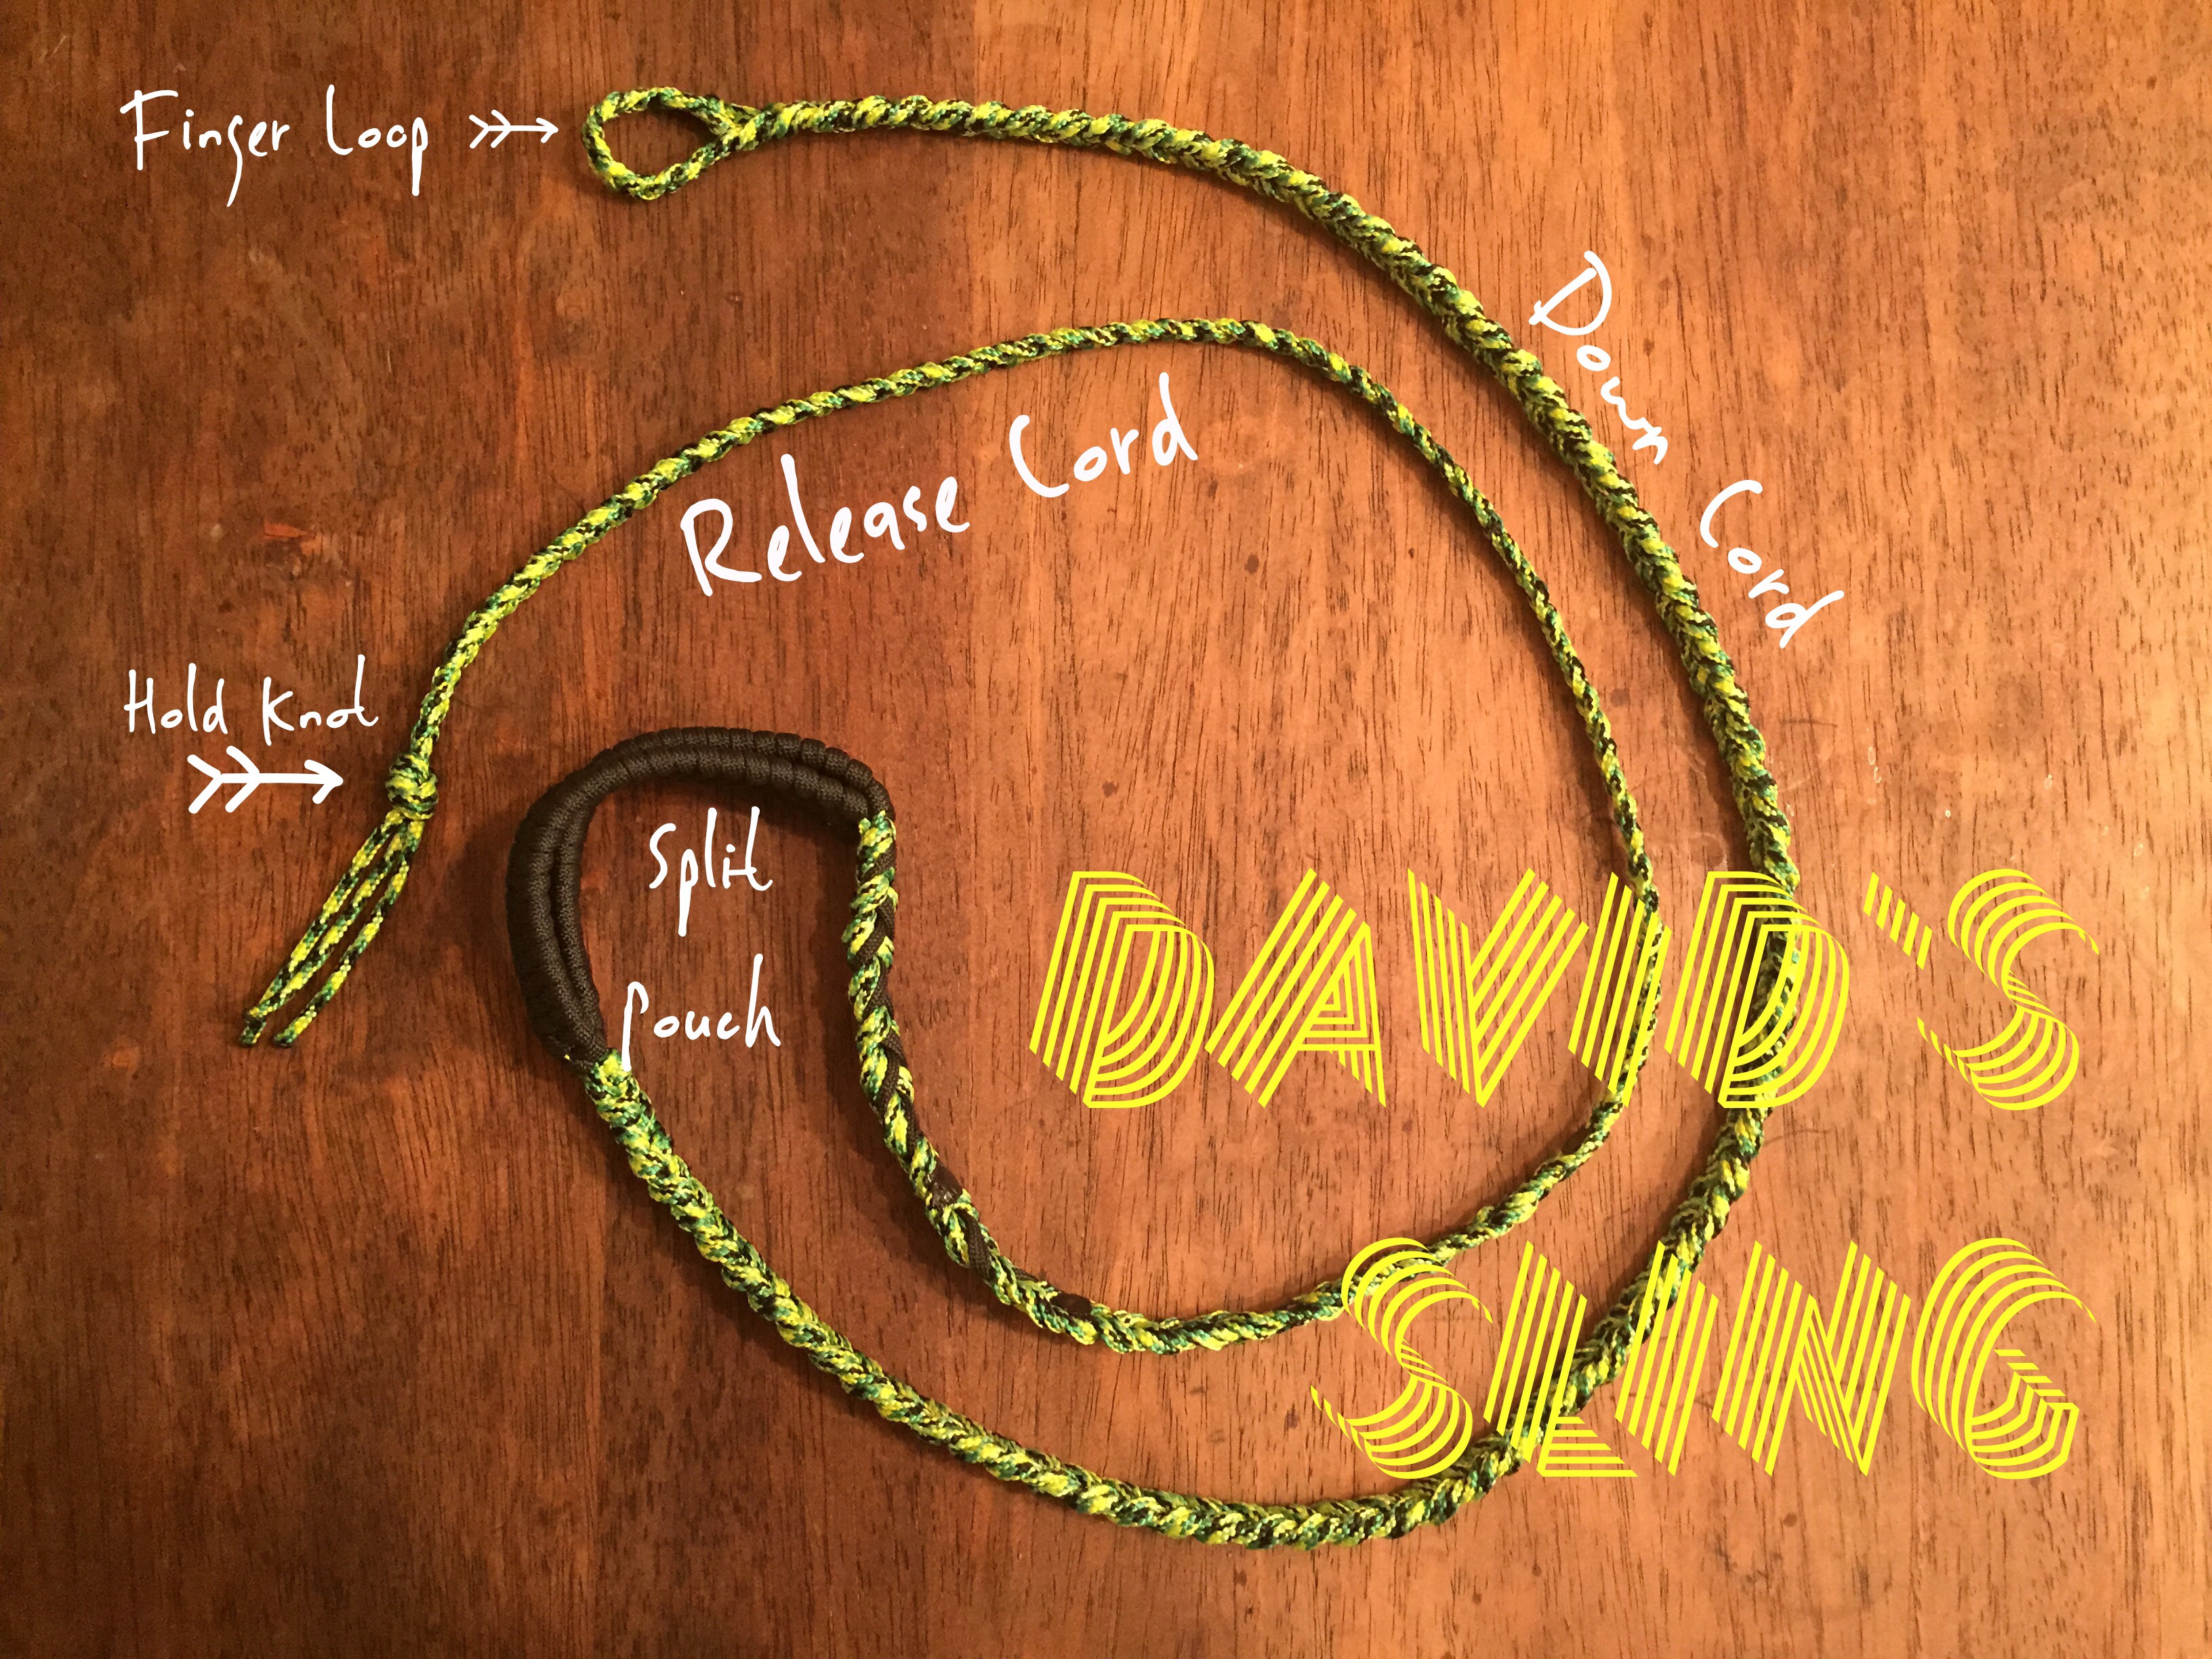 How to make a Paracord "David's Sling" 